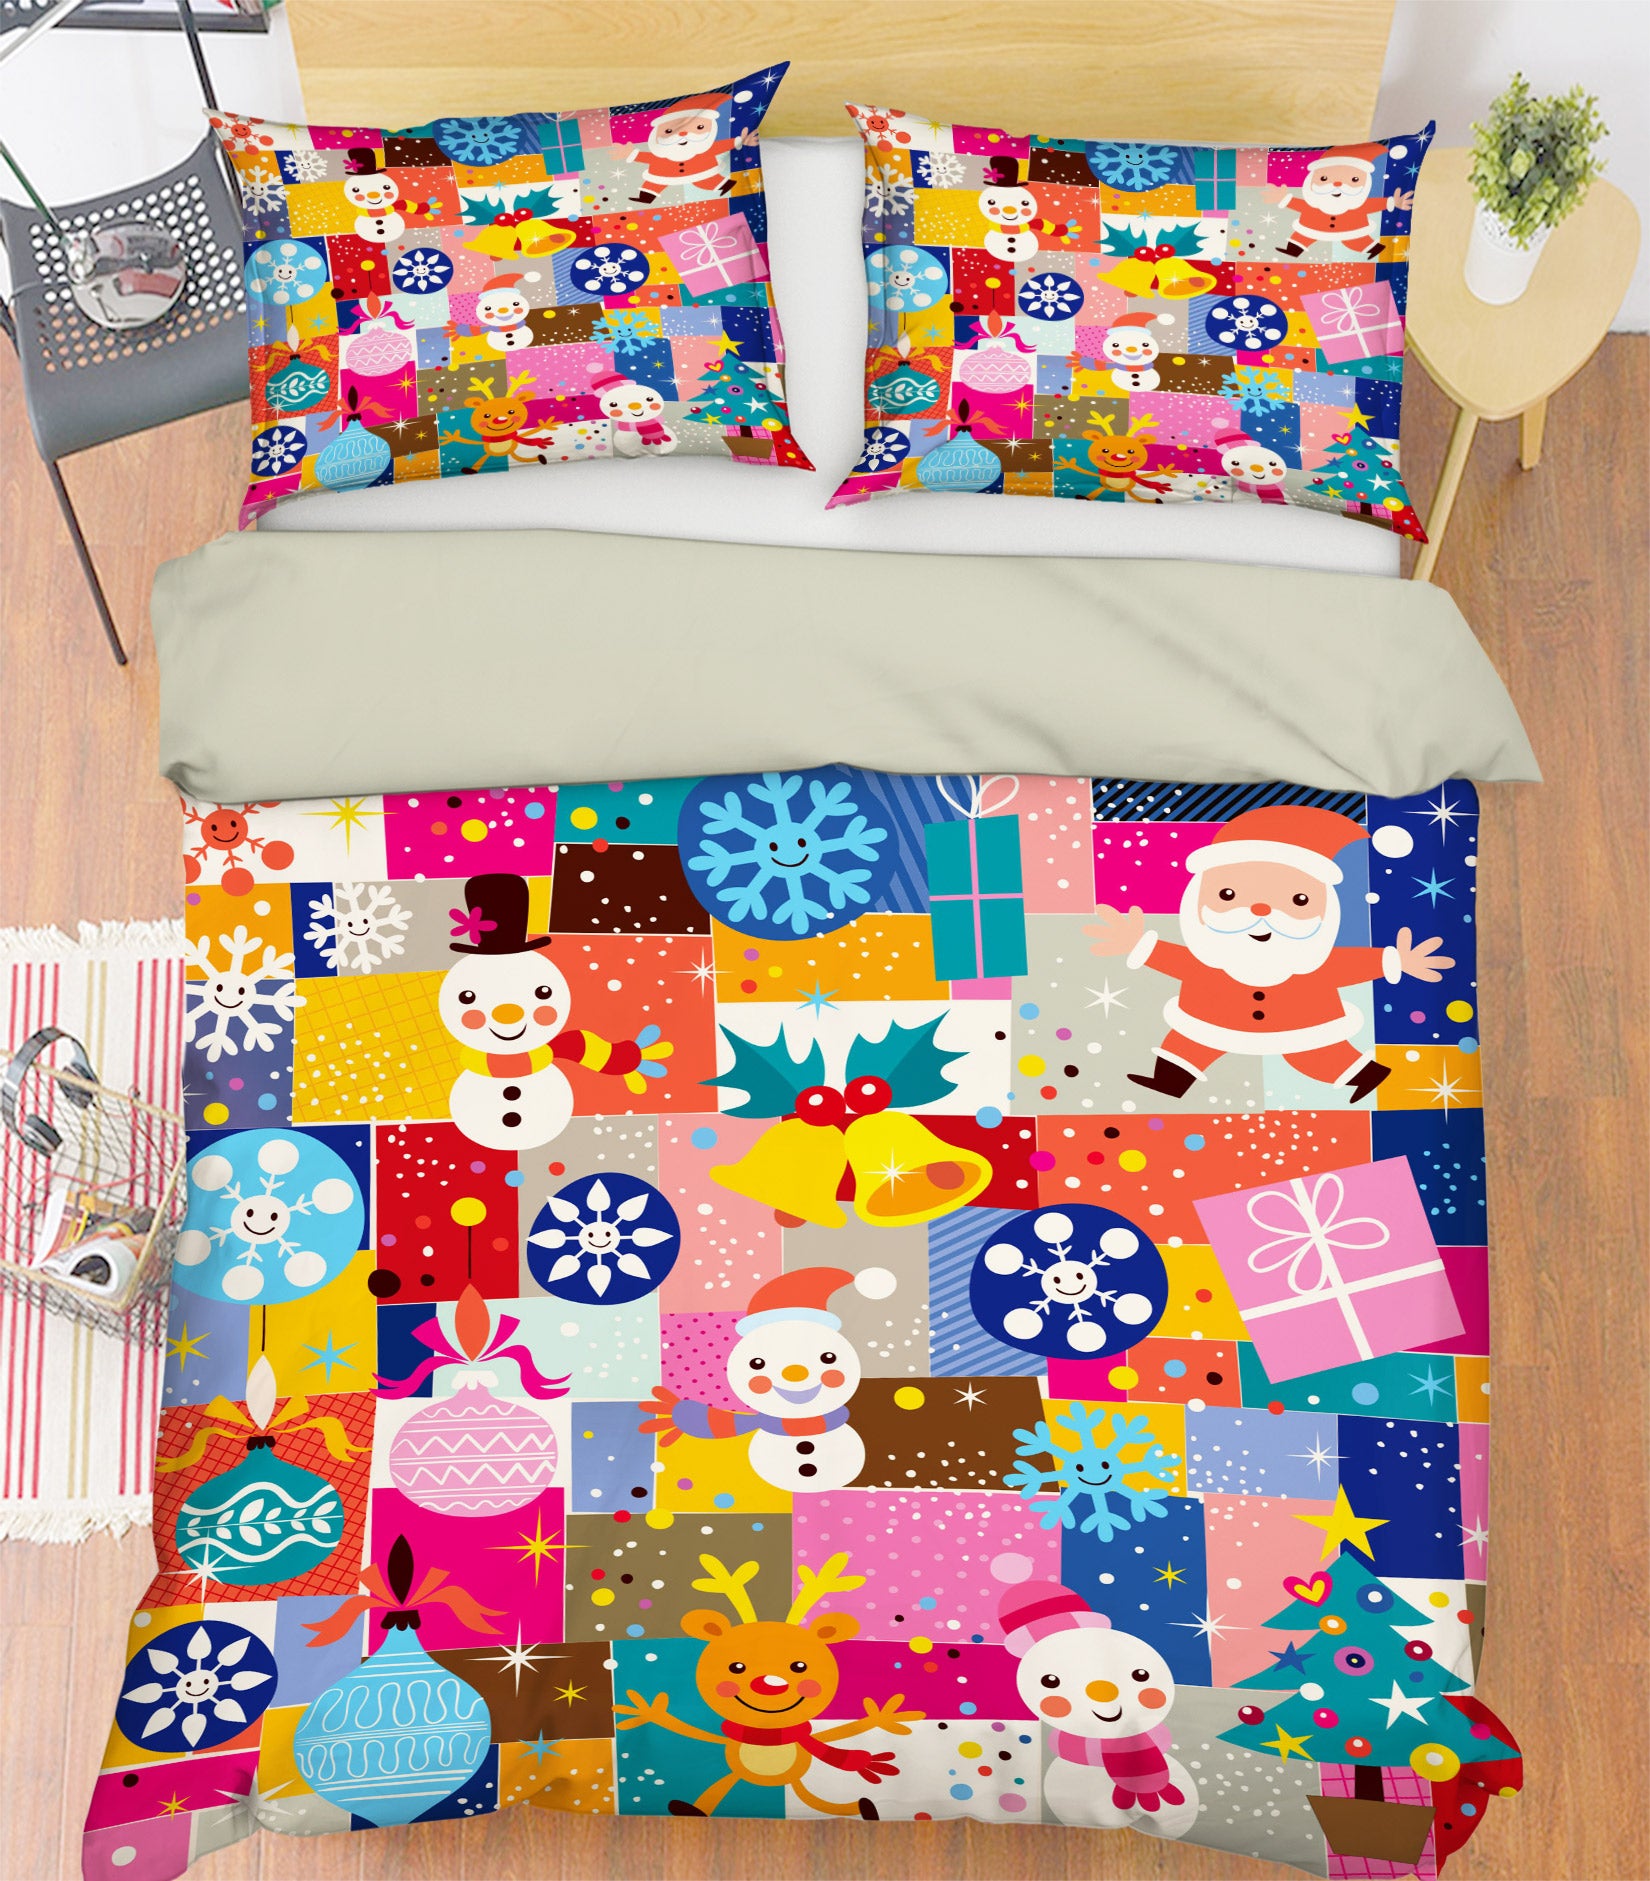 3D Colored Square Snowman 52114 Christmas Quilt Duvet Cover Xmas Bed Pillowcases